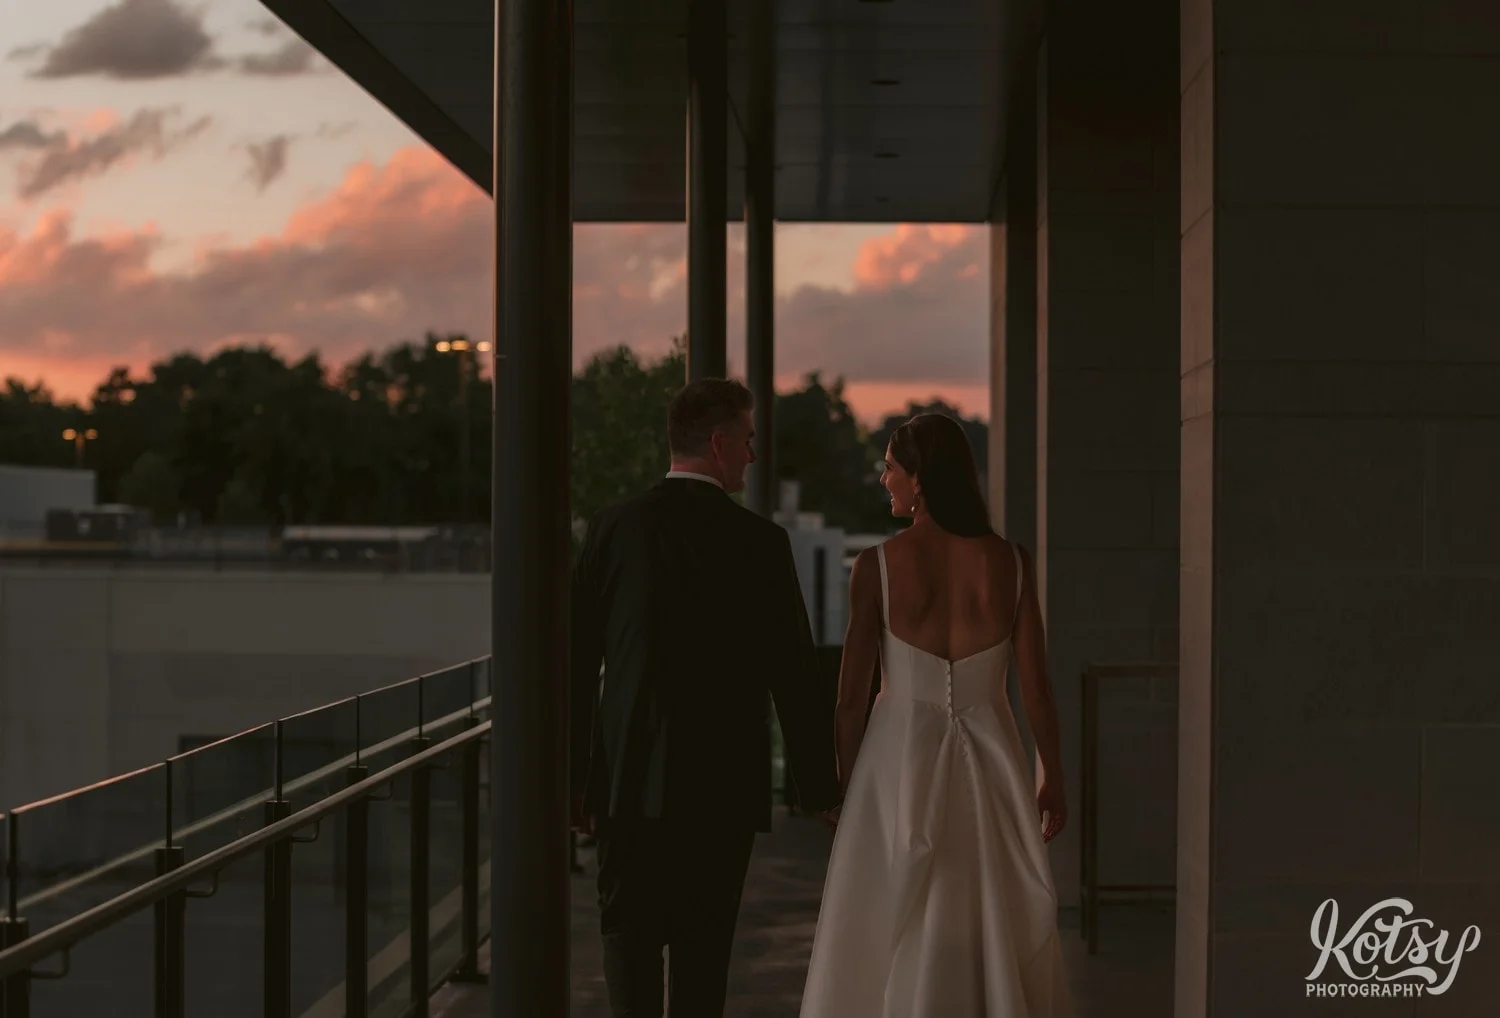 A bride and groom walk away from the camera on a balcony during sunset at their Village Loft wedding reception in Toronto, Canada